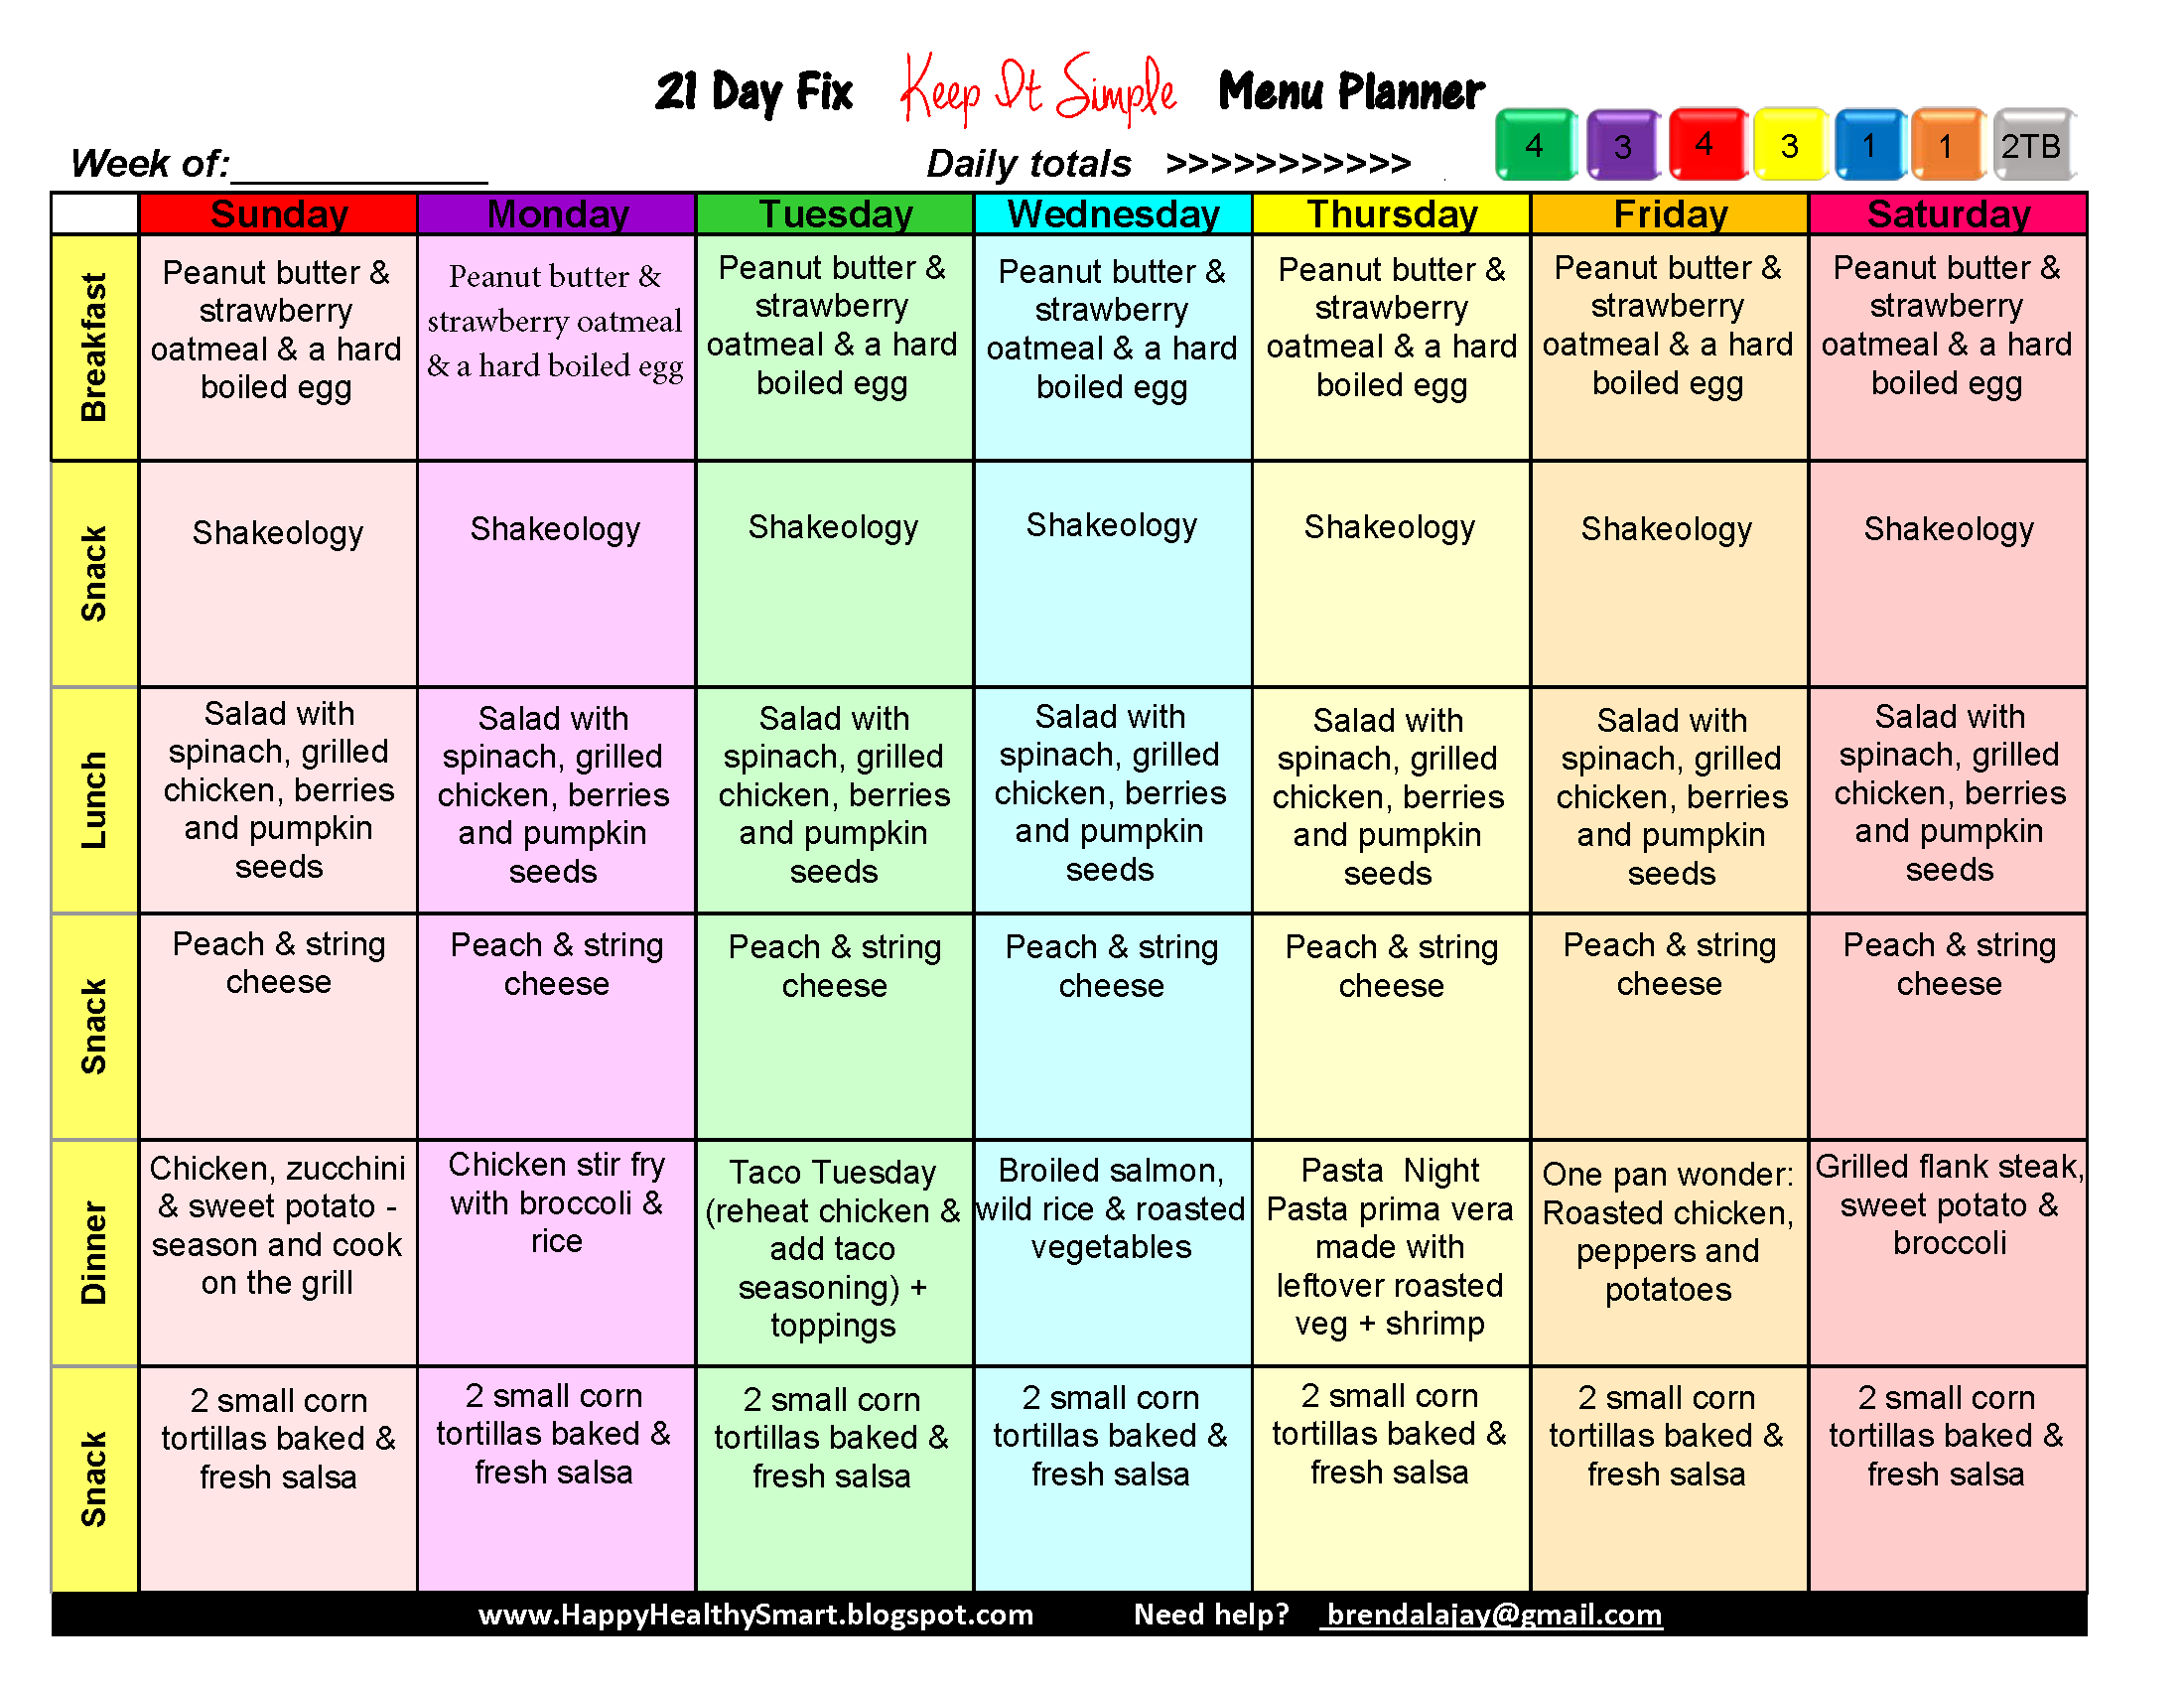 21 Day Fix Sample Meal Plans - Fueled For Fitness